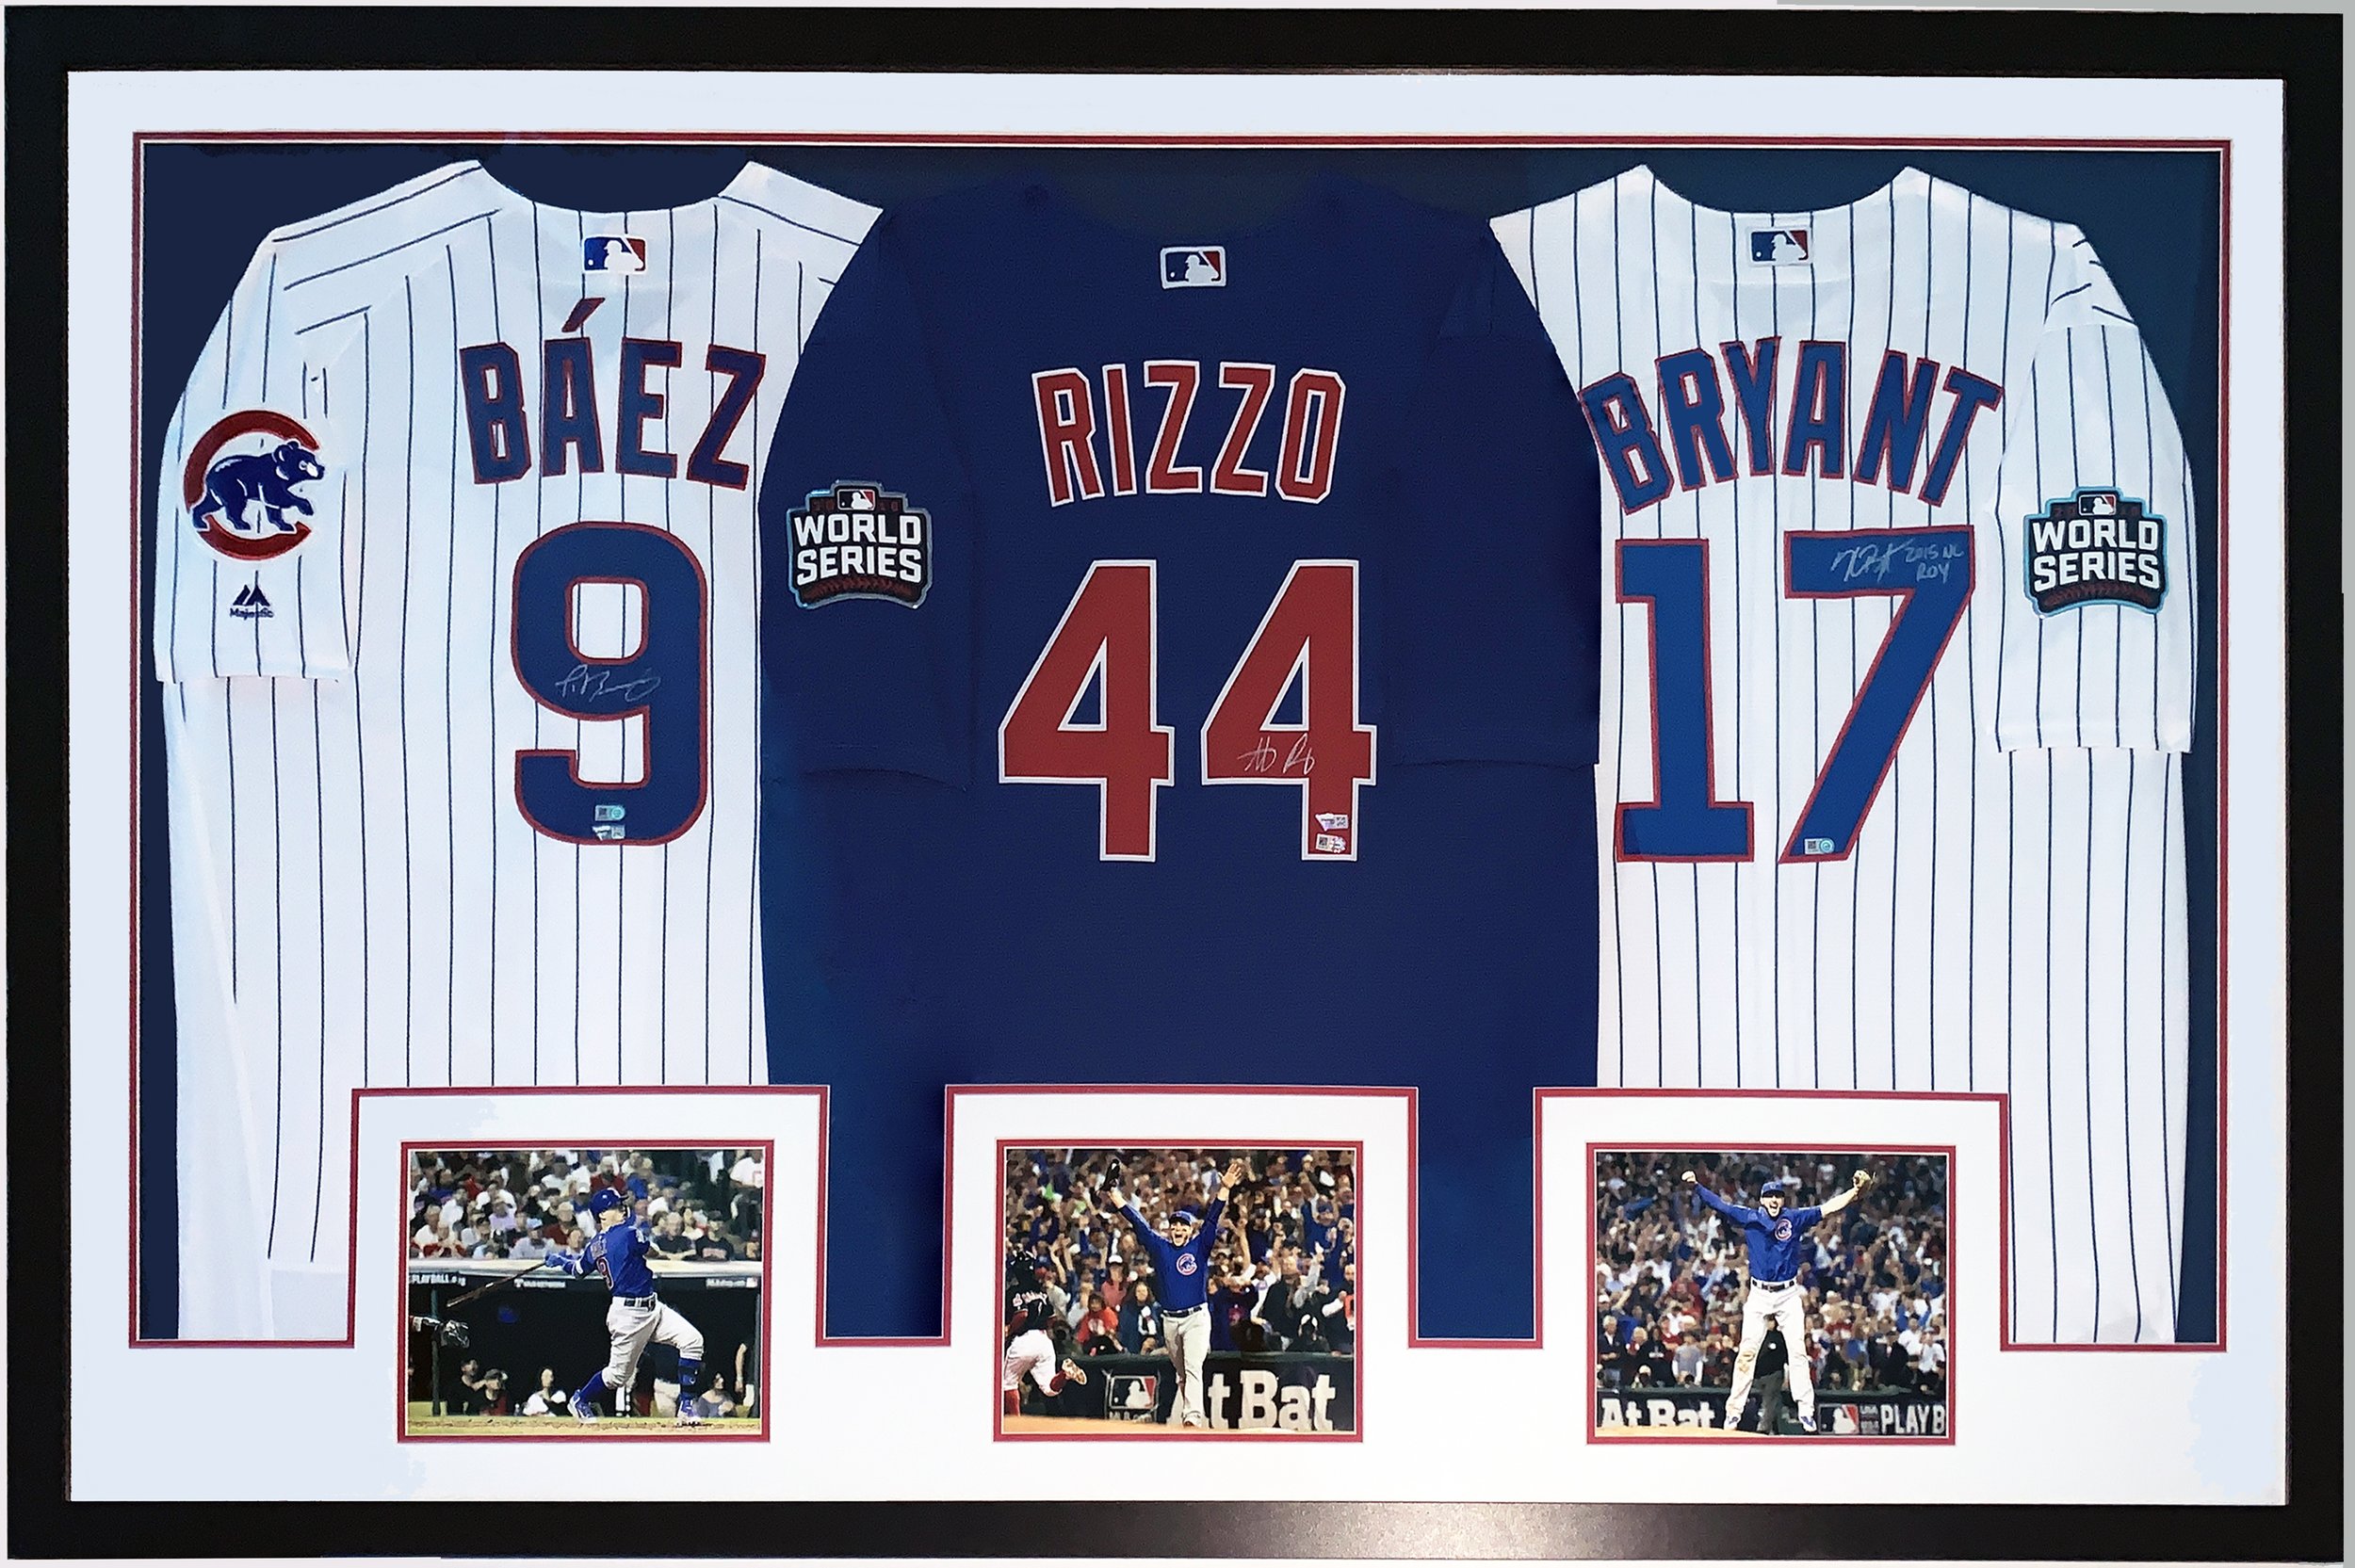 chicago cubs basketball jersey